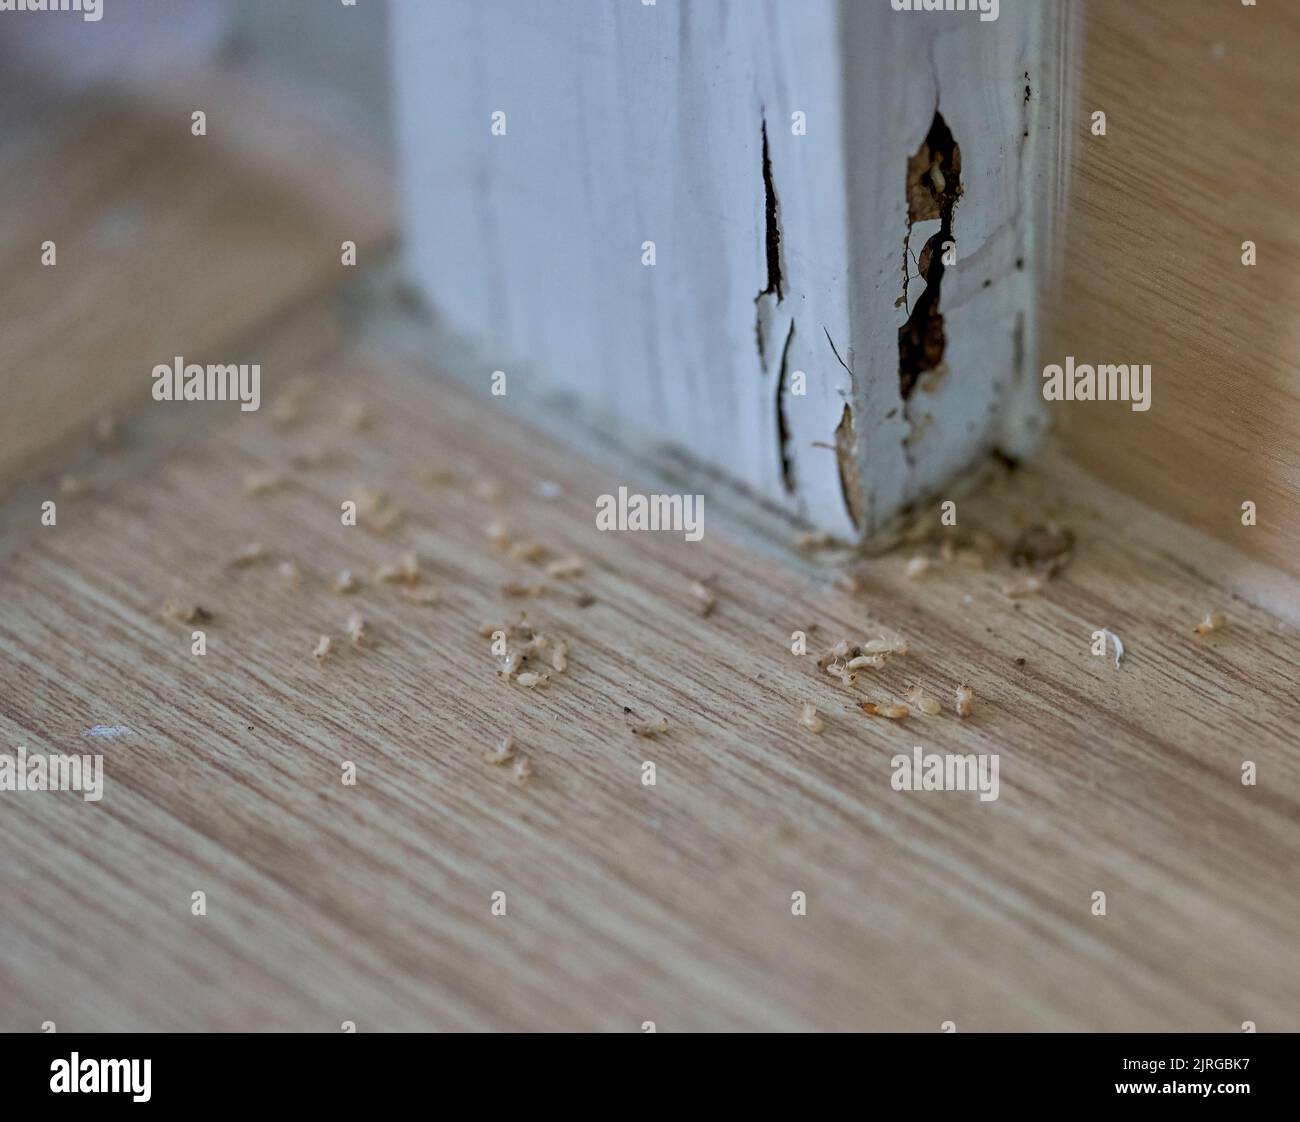 A close-up of termites in a house and the damage they caused. Stock Photo